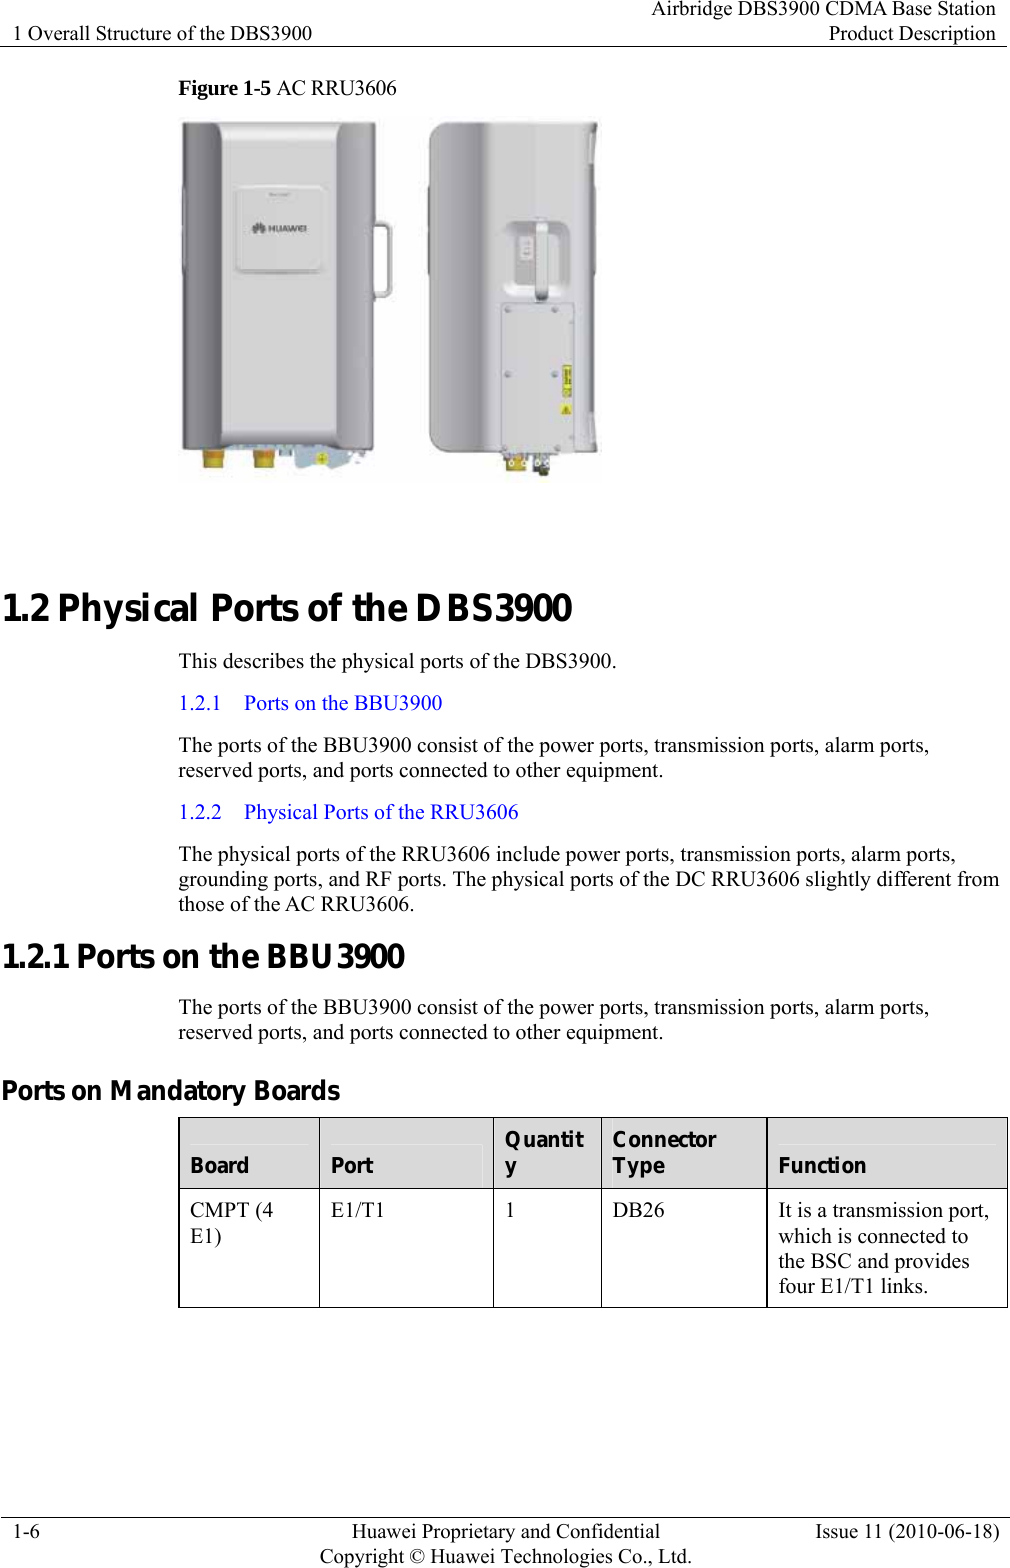 1 Overall Structure of the DBS3900 Airbridge DBS3900 CDMA Base StationProduct Description 1-6  Huawei Proprietary and Confidential     Copyright © Huawei Technologies Co., Ltd.Issue 11 (2010-06-18) Figure 1-5 AC RRU3606   1.2 Physical Ports of the DBS3900 This describes the physical ports of the DBS3900. 1.2.1  Ports on the BBU3900 The ports of the BBU3900 consist of the power ports, transmission ports, alarm ports, reserved ports, and ports connected to other equipment. 1.2.2  Physical Ports of the RRU3606 The physical ports of the RRU3606 include power ports, transmission ports, alarm ports, grounding ports, and RF ports. The physical ports of the DC RRU3606 slightly different from those of the AC RRU3606. 1.2.1 Ports on the BBU3900 The ports of the BBU3900 consist of the power ports, transmission ports, alarm ports, reserved ports, and ports connected to other equipment. Ports on Mandatory Boards Board  Port  Quantity  Connector Type  Function CMPT (4 E1) E1/T1  1  DB26  It is a transmission port, which is connected to the BSC and provides four E1/T1 links. 